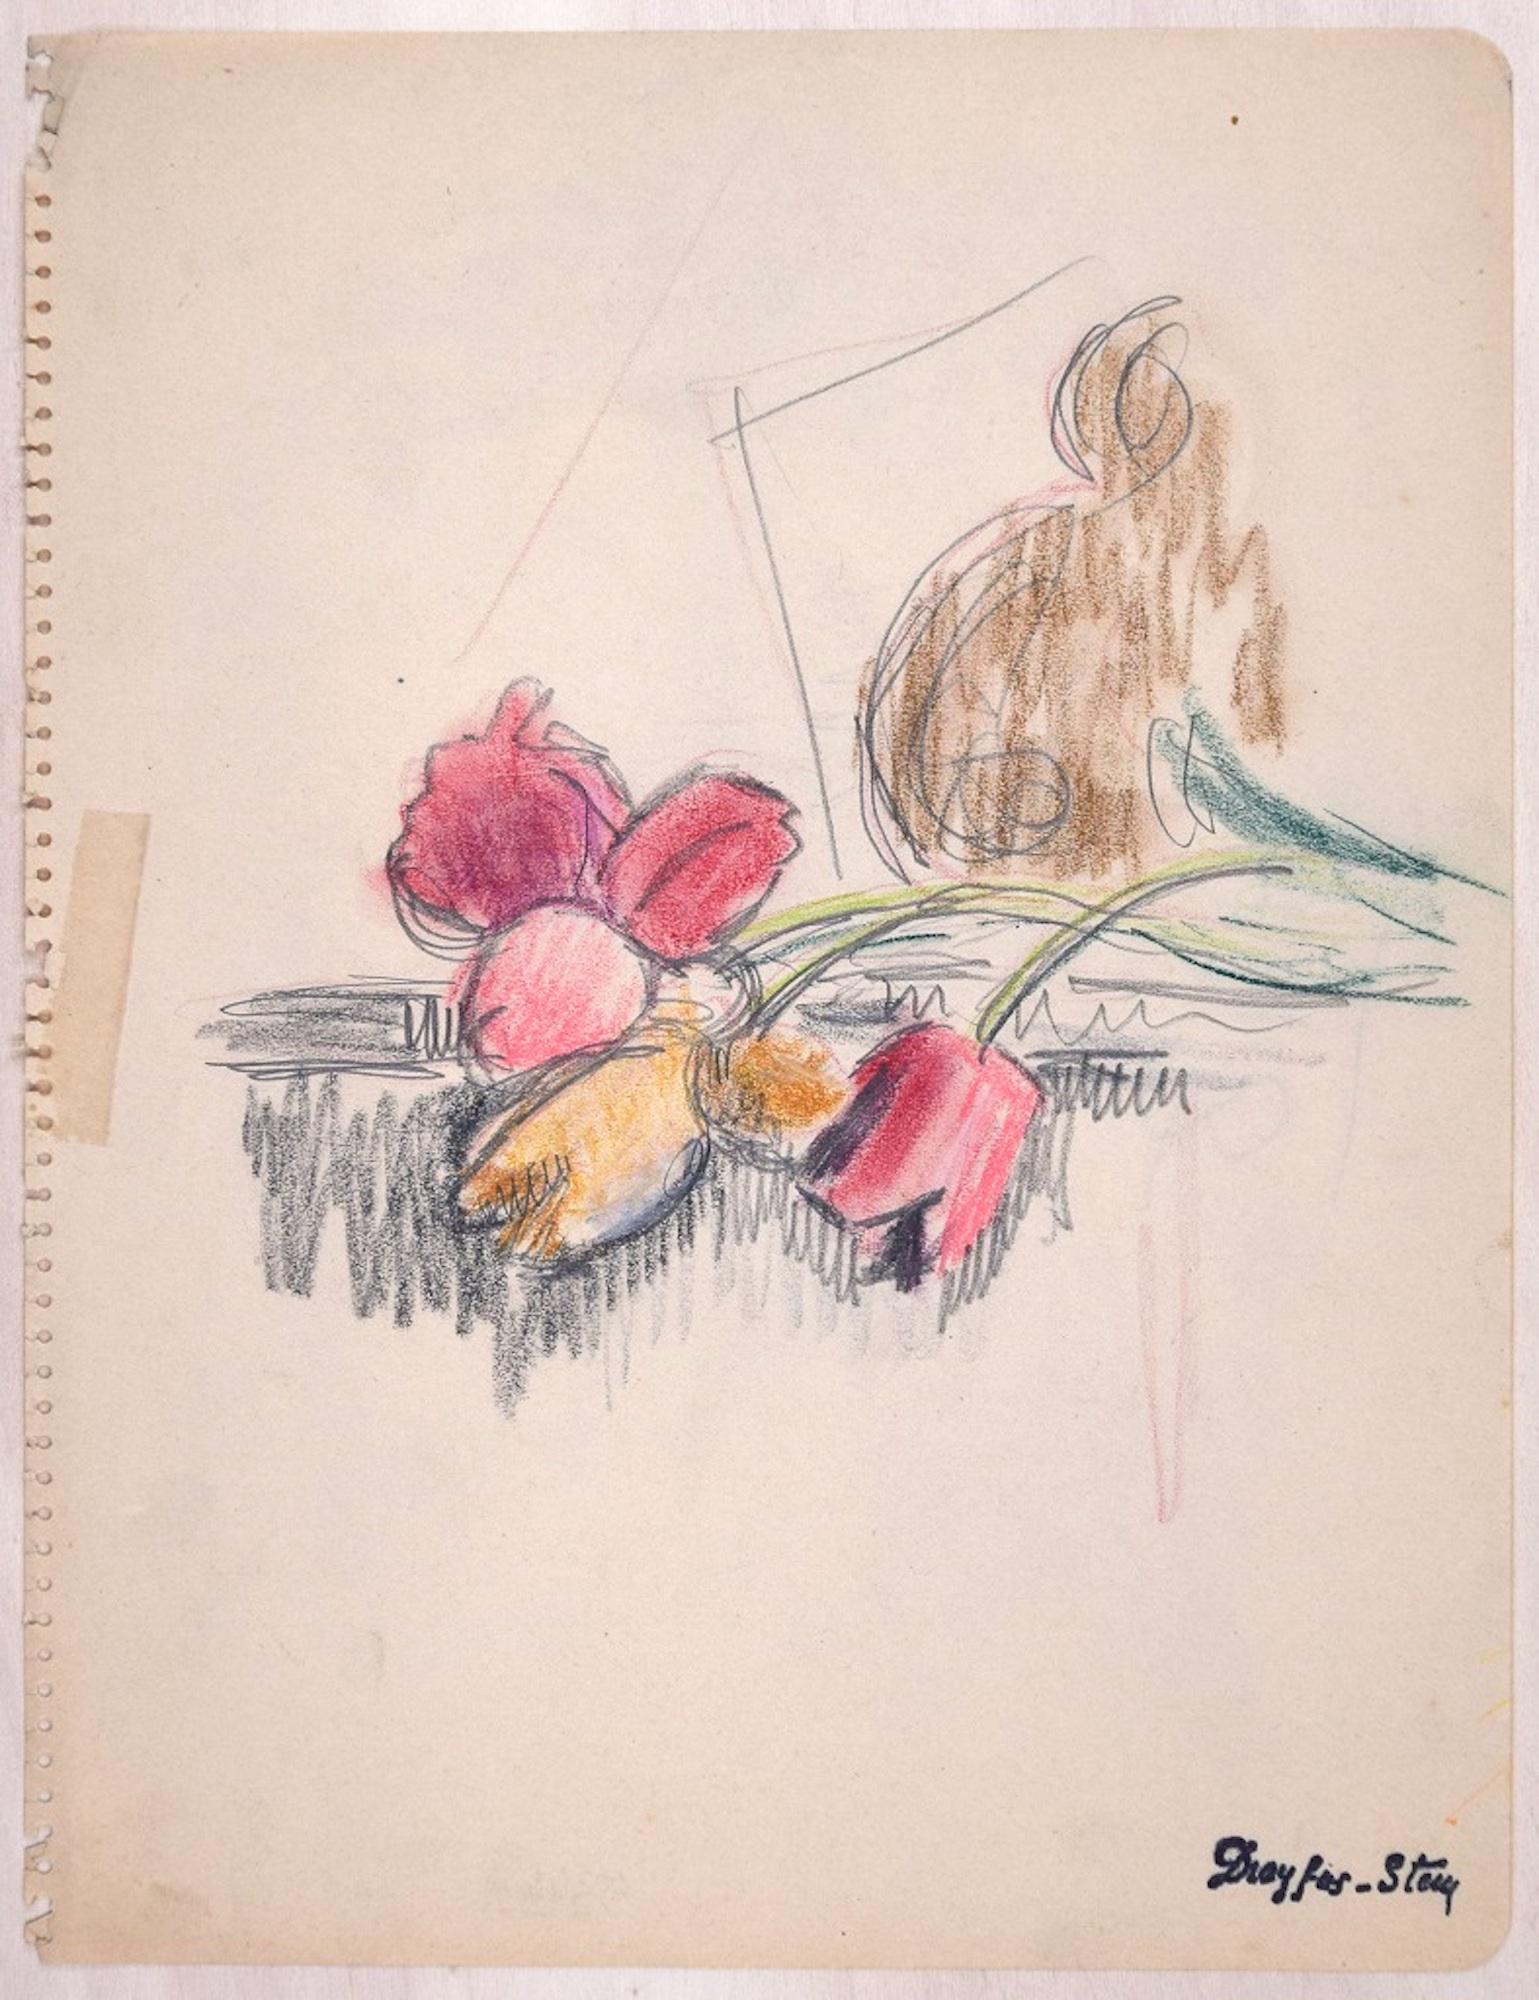 Jean Dreyfus-Stern Interior Art - Sketch of Flowers - Original Pastel, Charcoal and Pencil Drawing